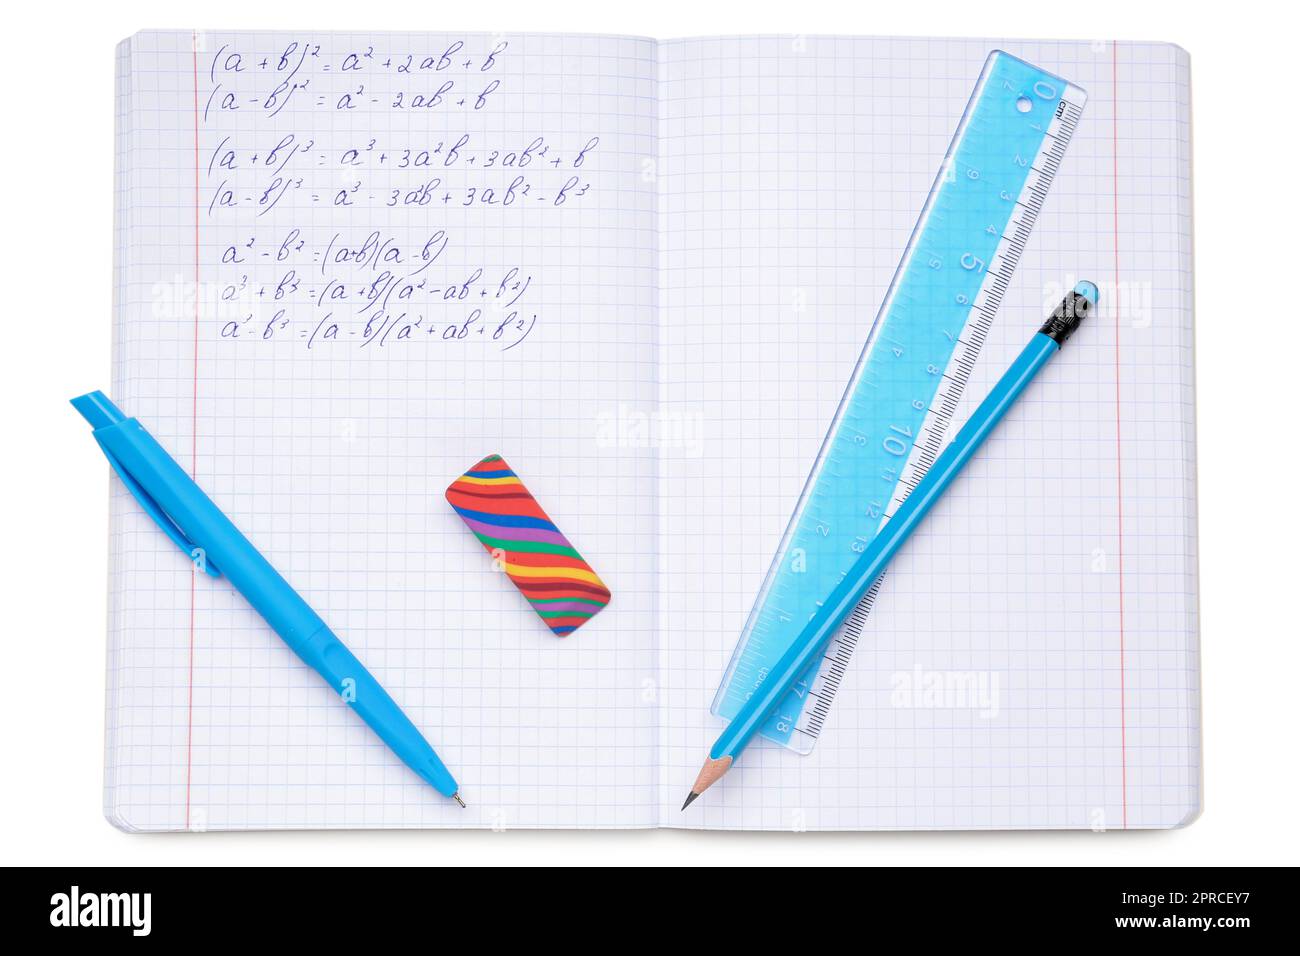 Copybook with maths formulas and stationery isolated on white background Stock Photo